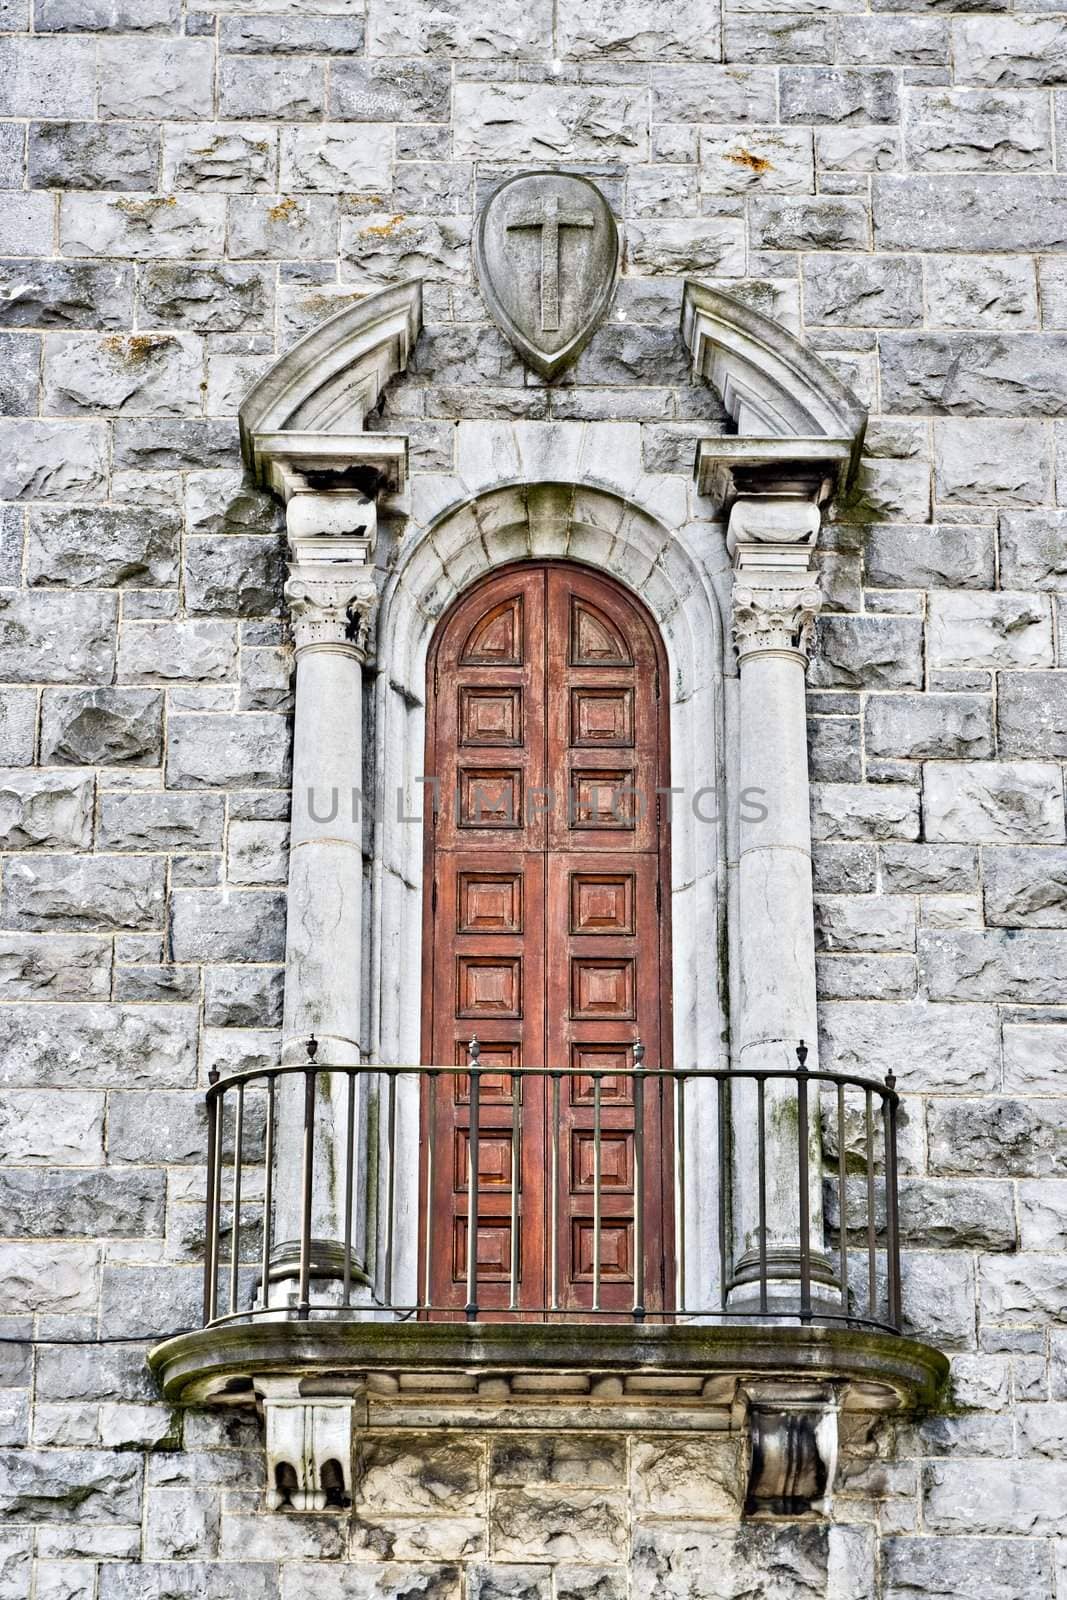 A balcony and door in a cathedral